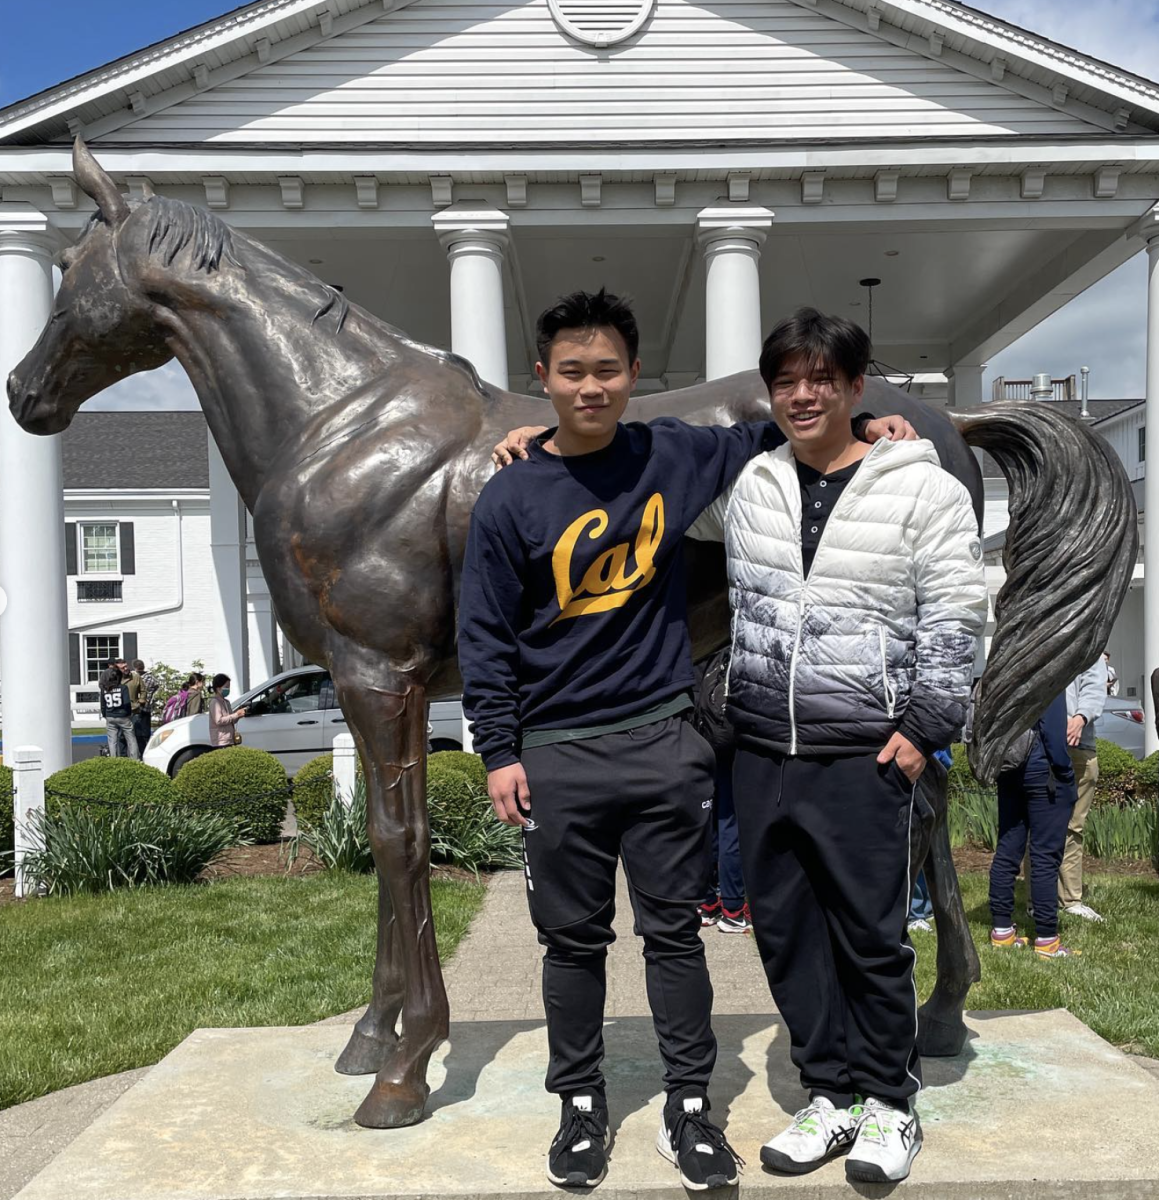 Zhang+and+Yang+pose+at+the+Tournament+of+Champions+at+the+University+of+Kentucky+last+spring.